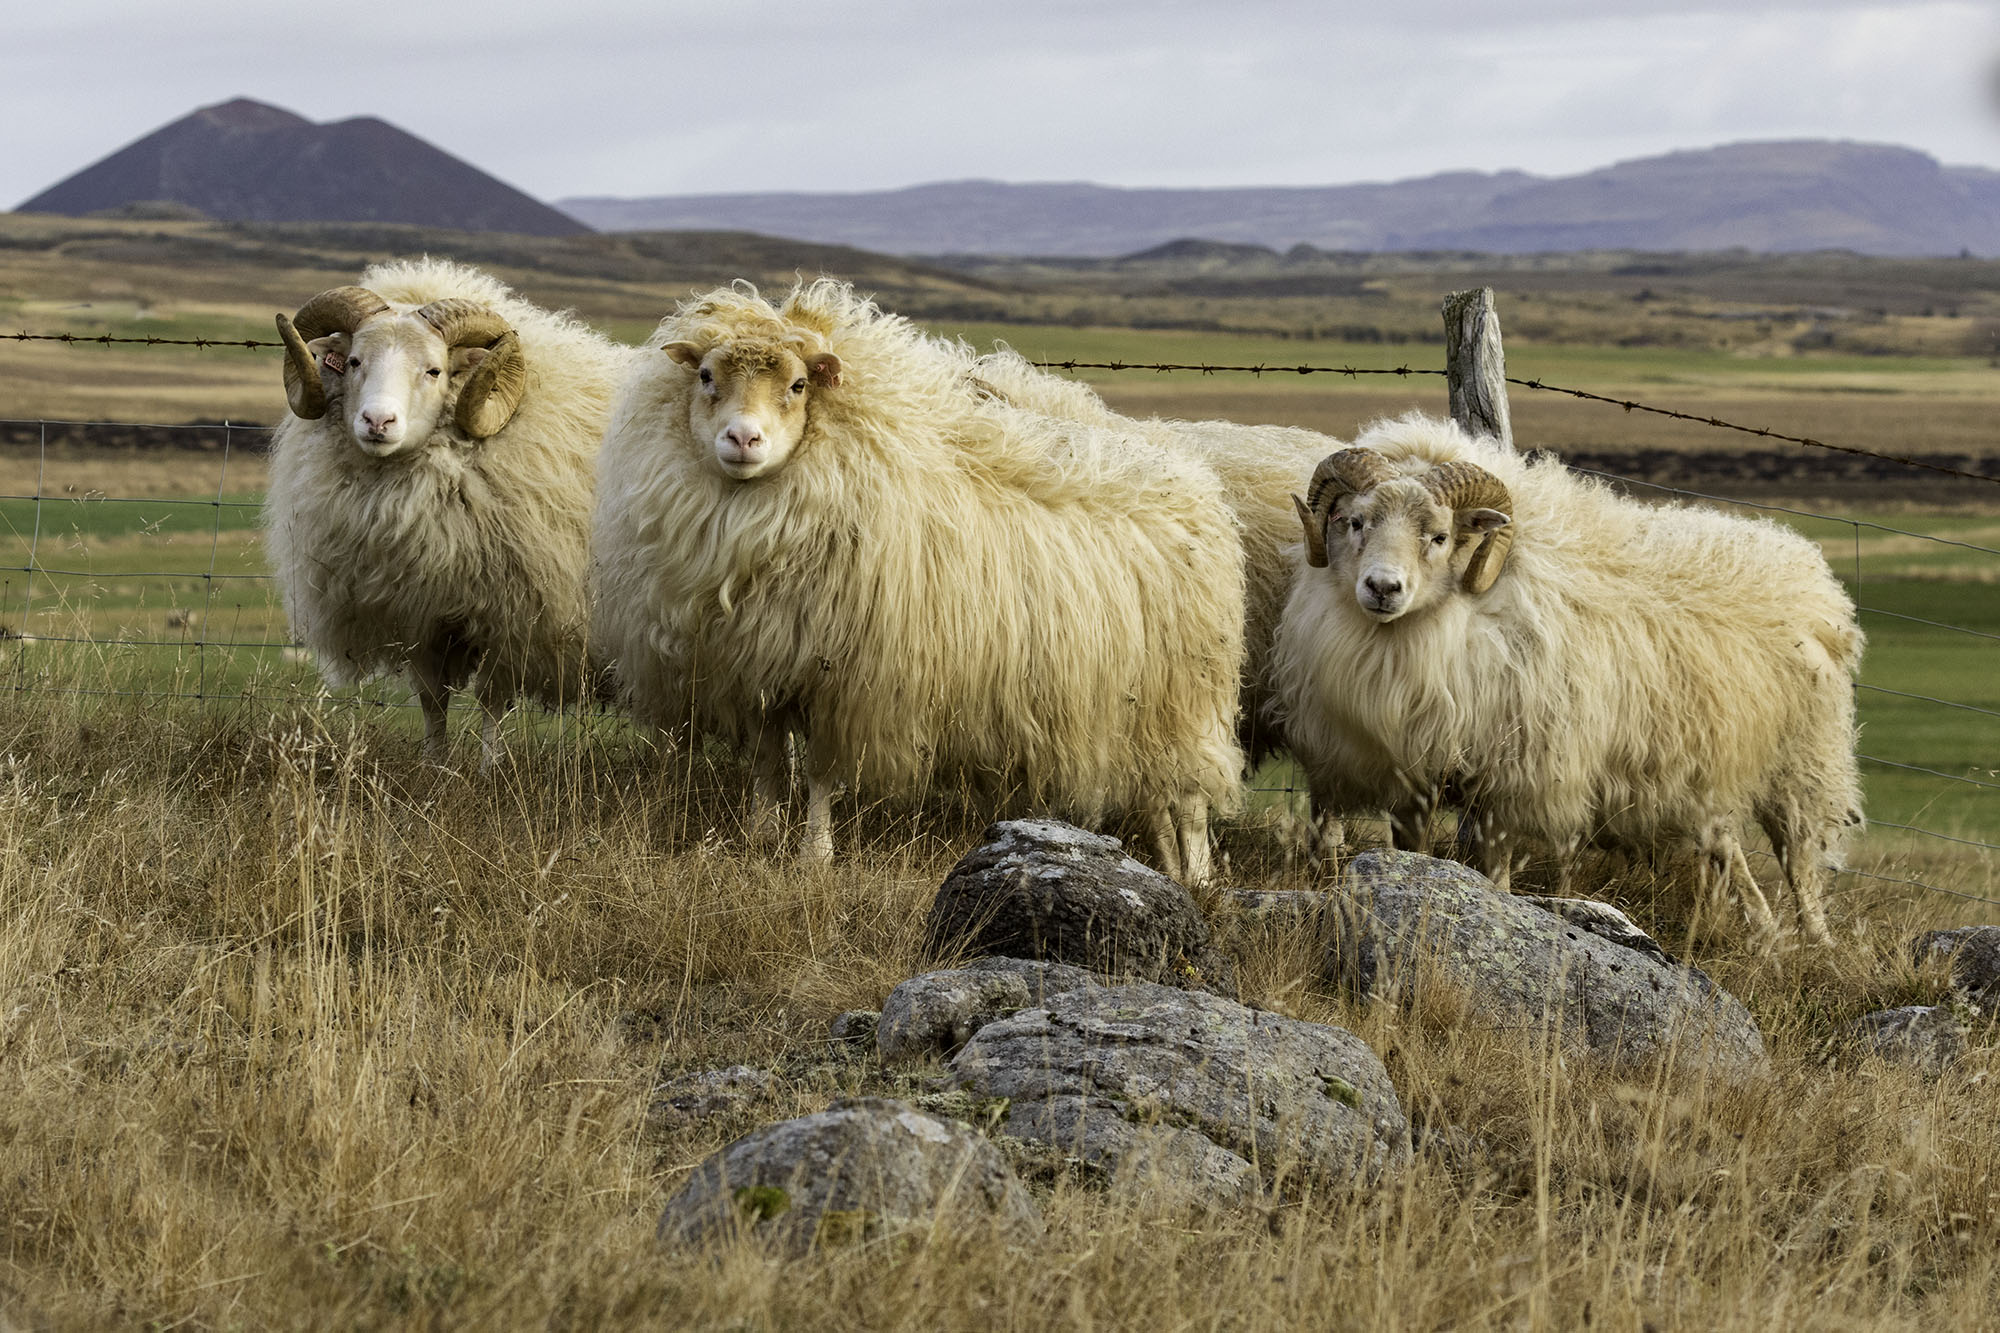 Icelandic sheep have been bred for a thousand years in a very harsh environment. They are breed for their wool and meat.